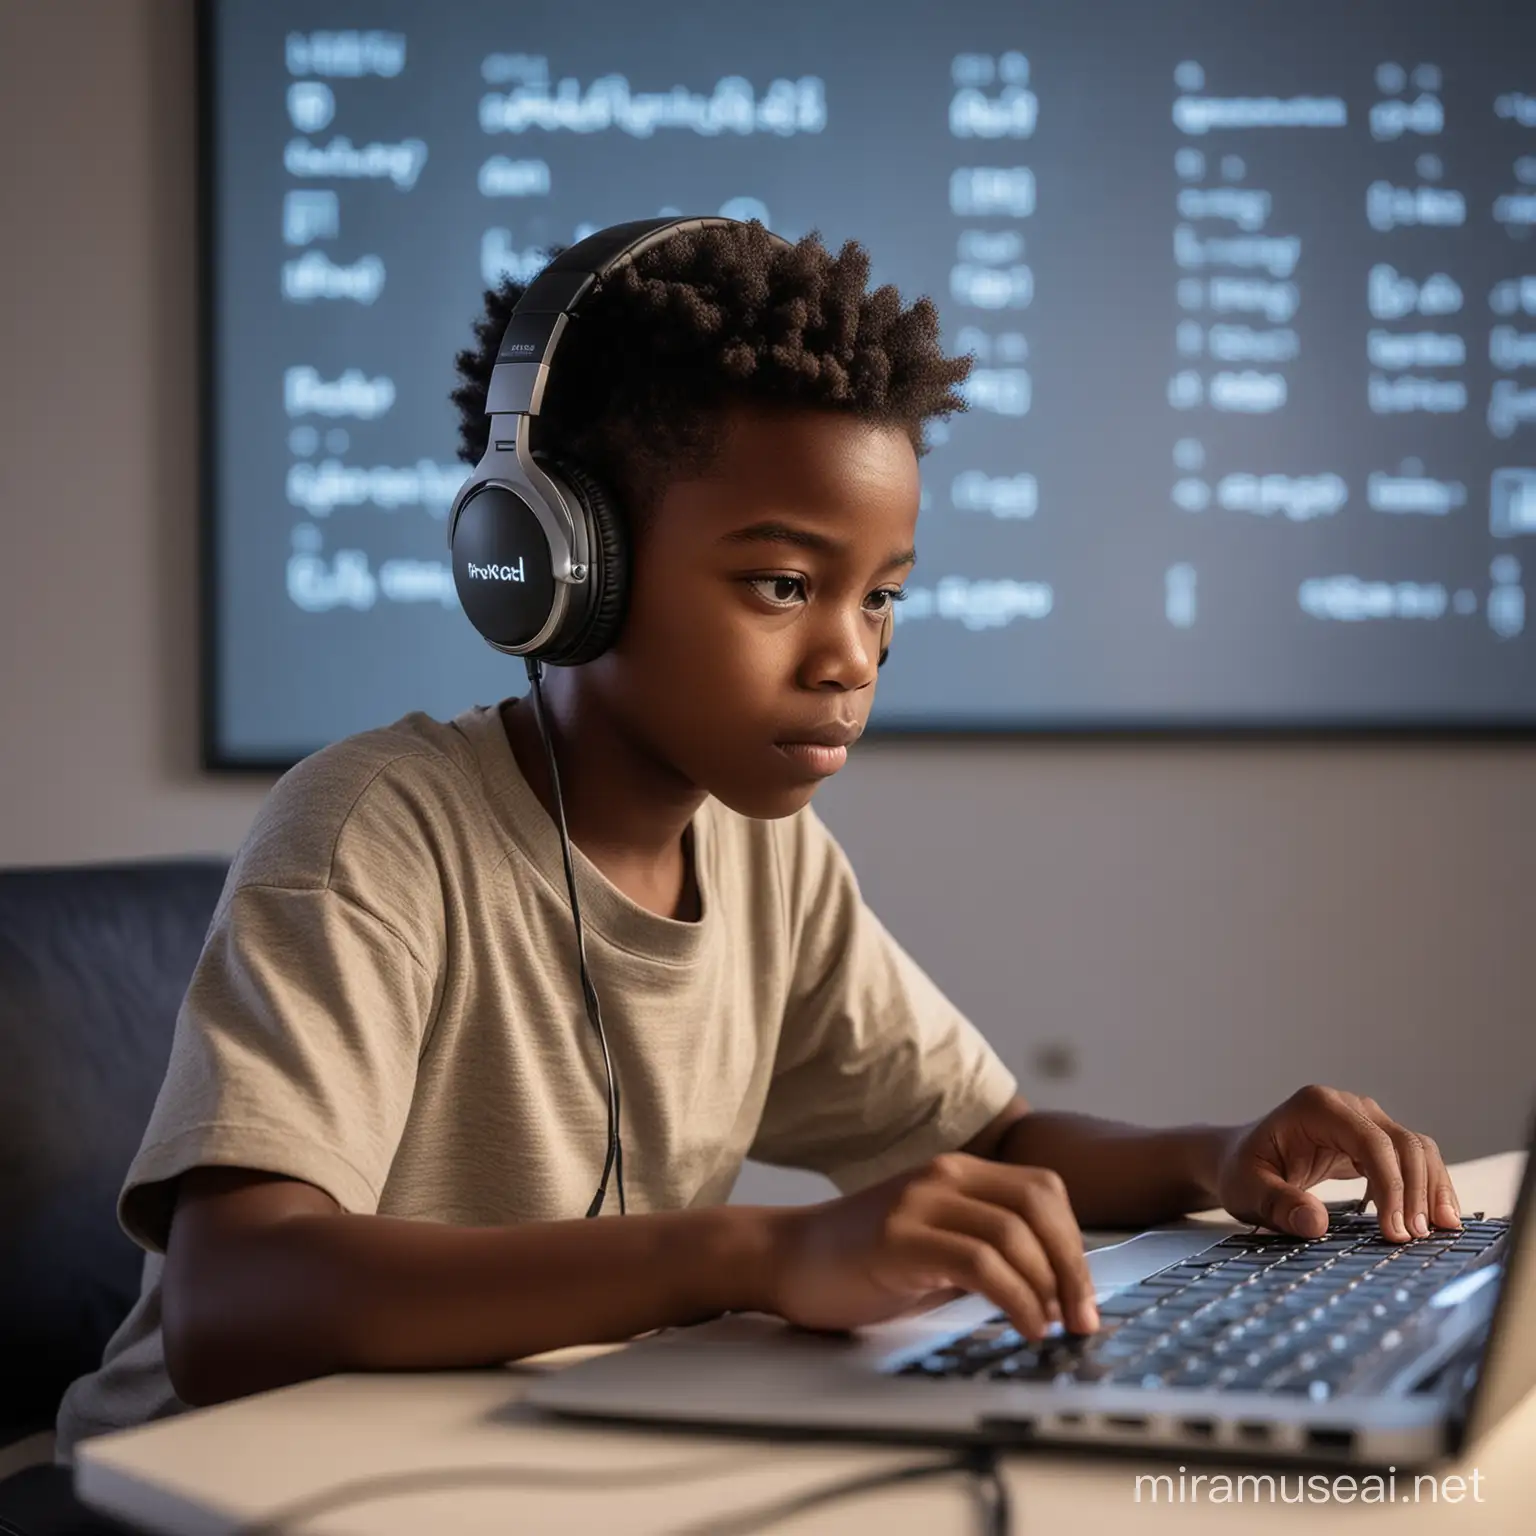 A young African boy coding information of a screen on headphones in a cool room